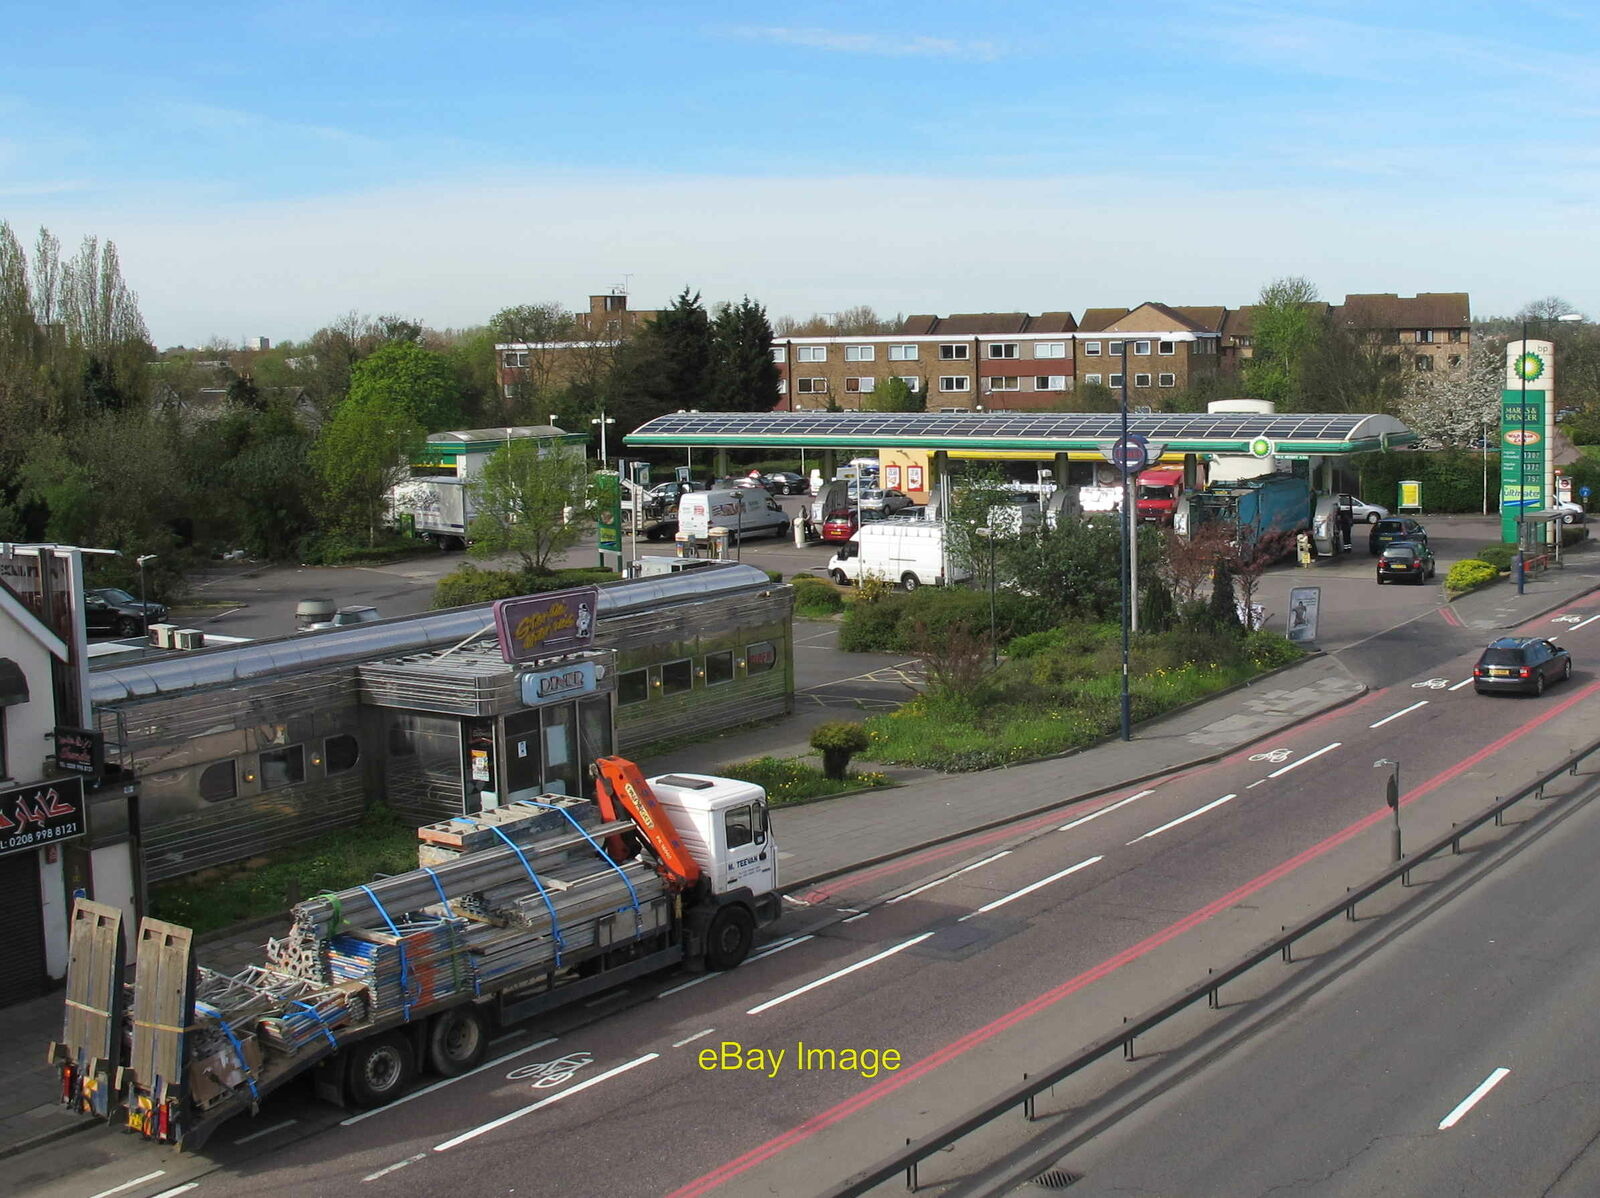 Photo 6x4 Filling station at Perivale A busy site as it is one of the las c2011